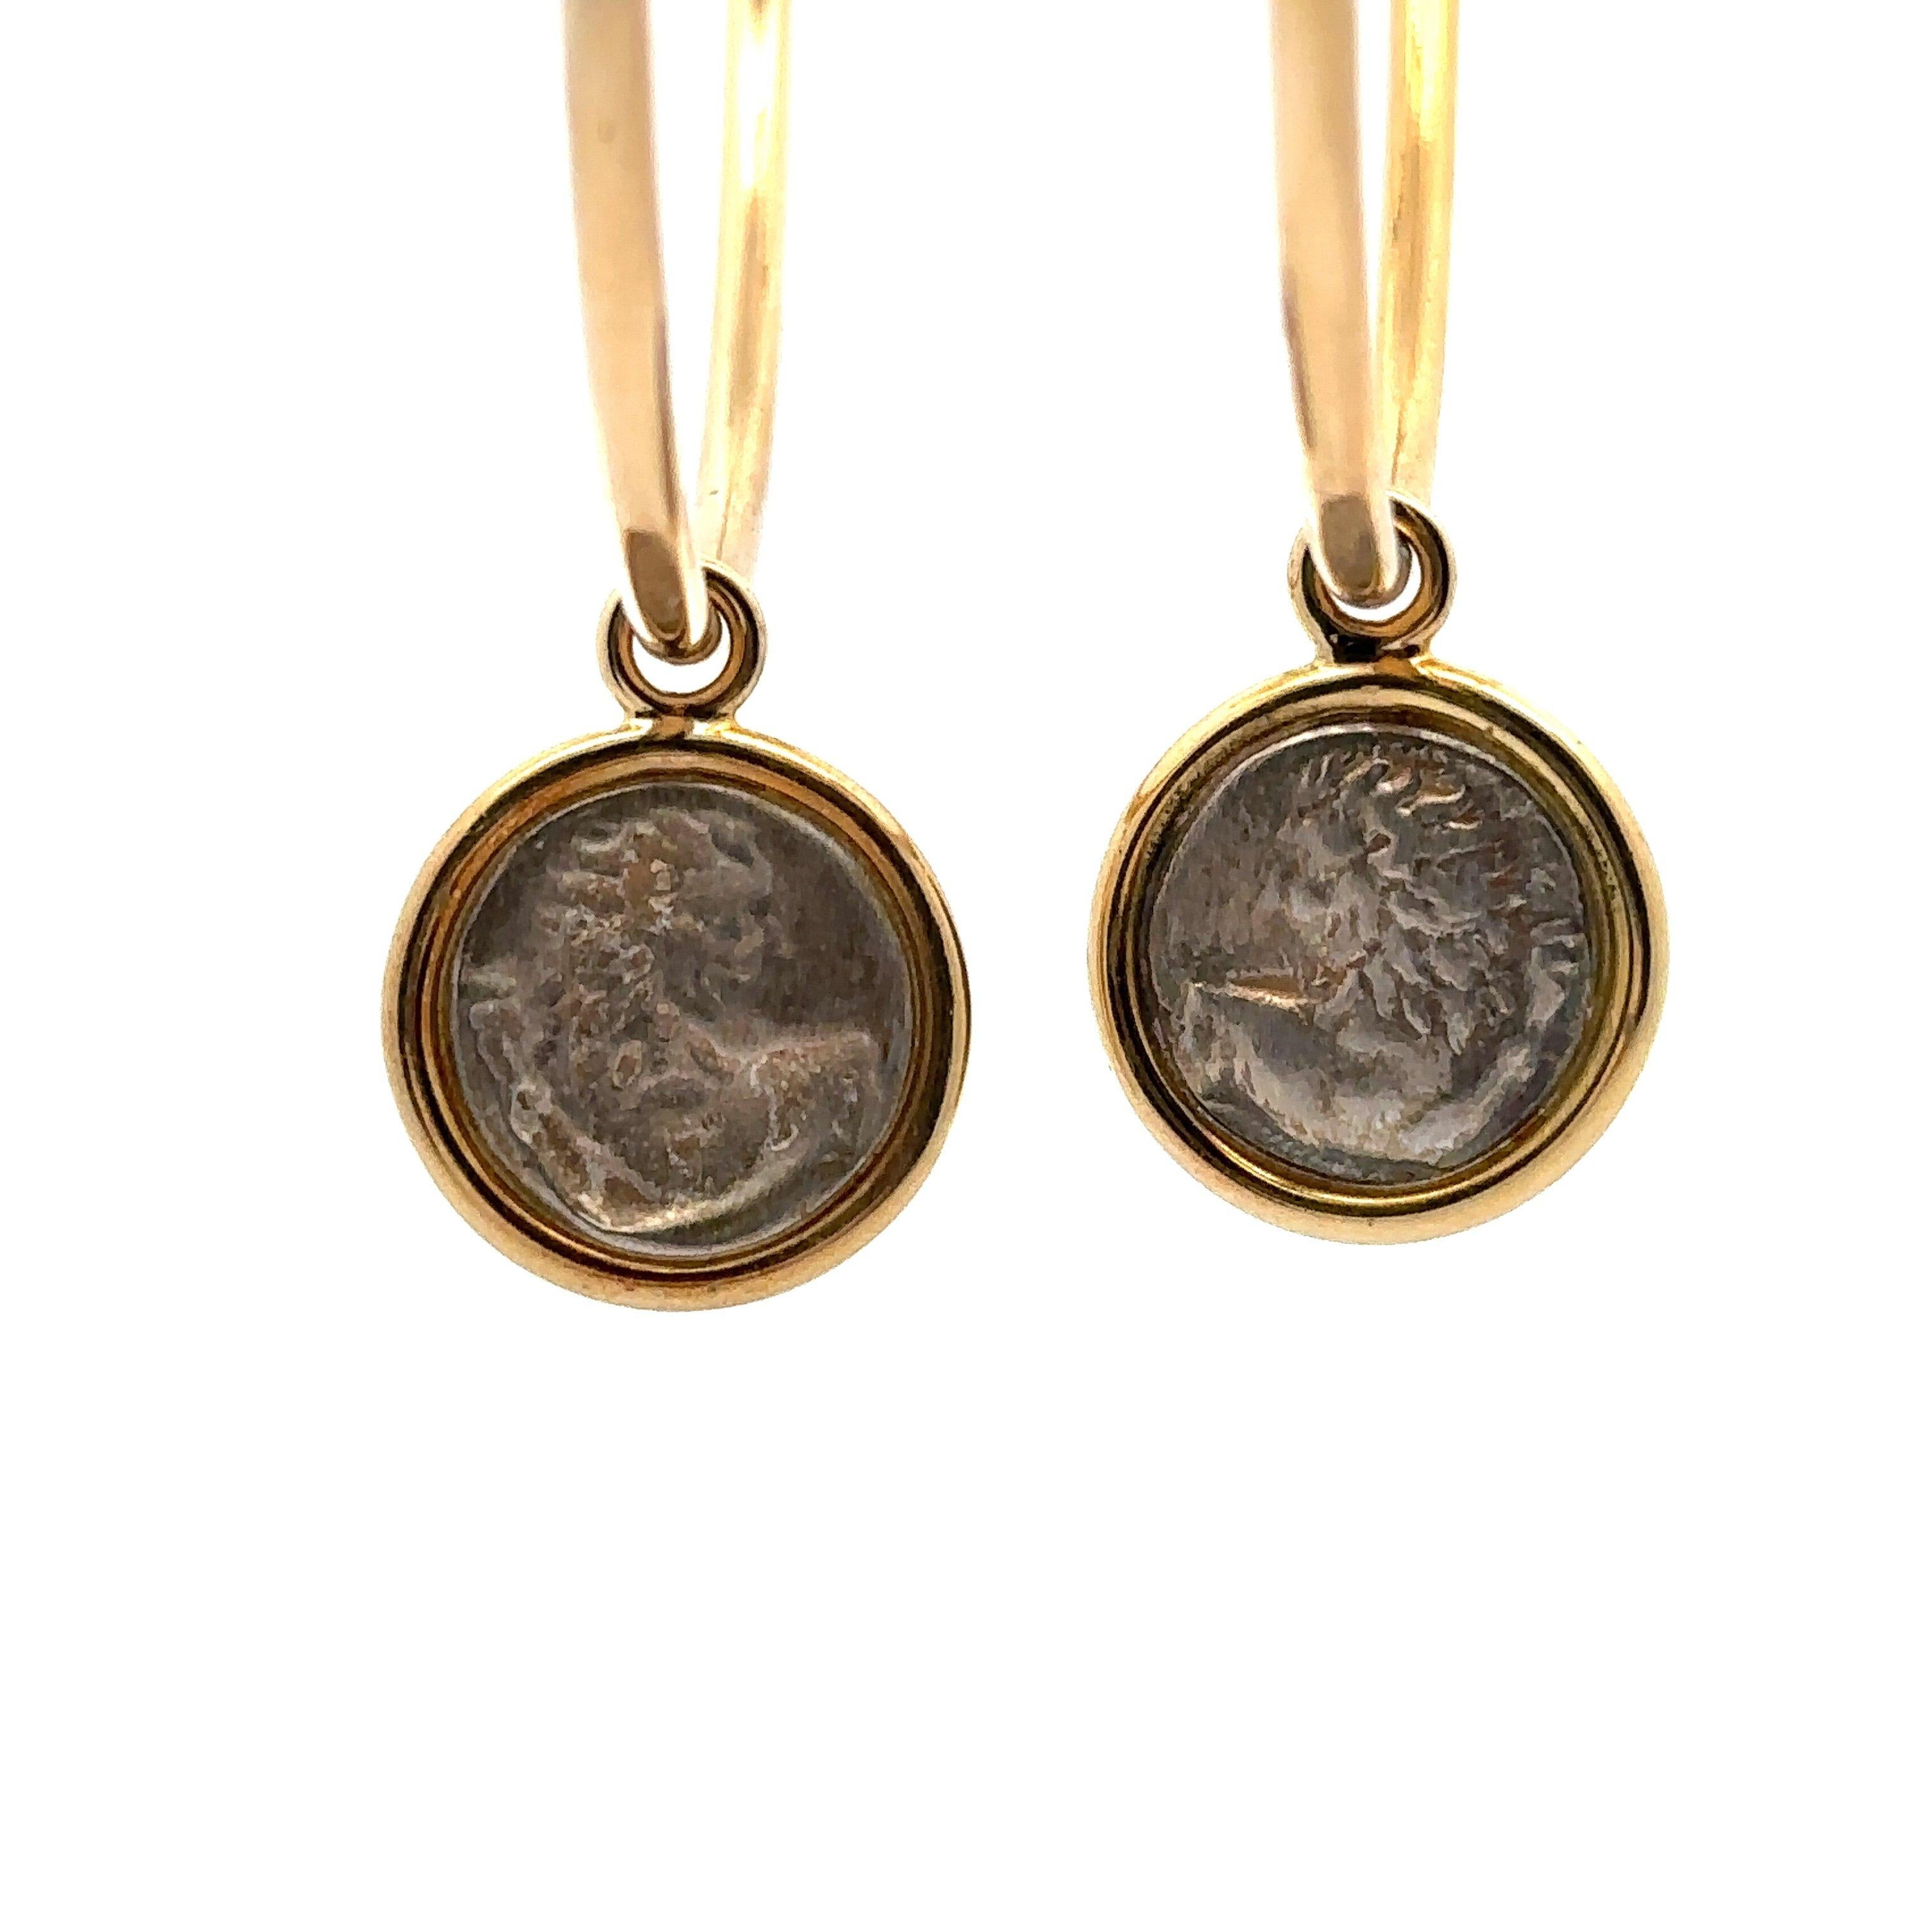 Contemporary Dubini 18KT Yellow Gold Large Hoop Earrings with Silver Lion Coins